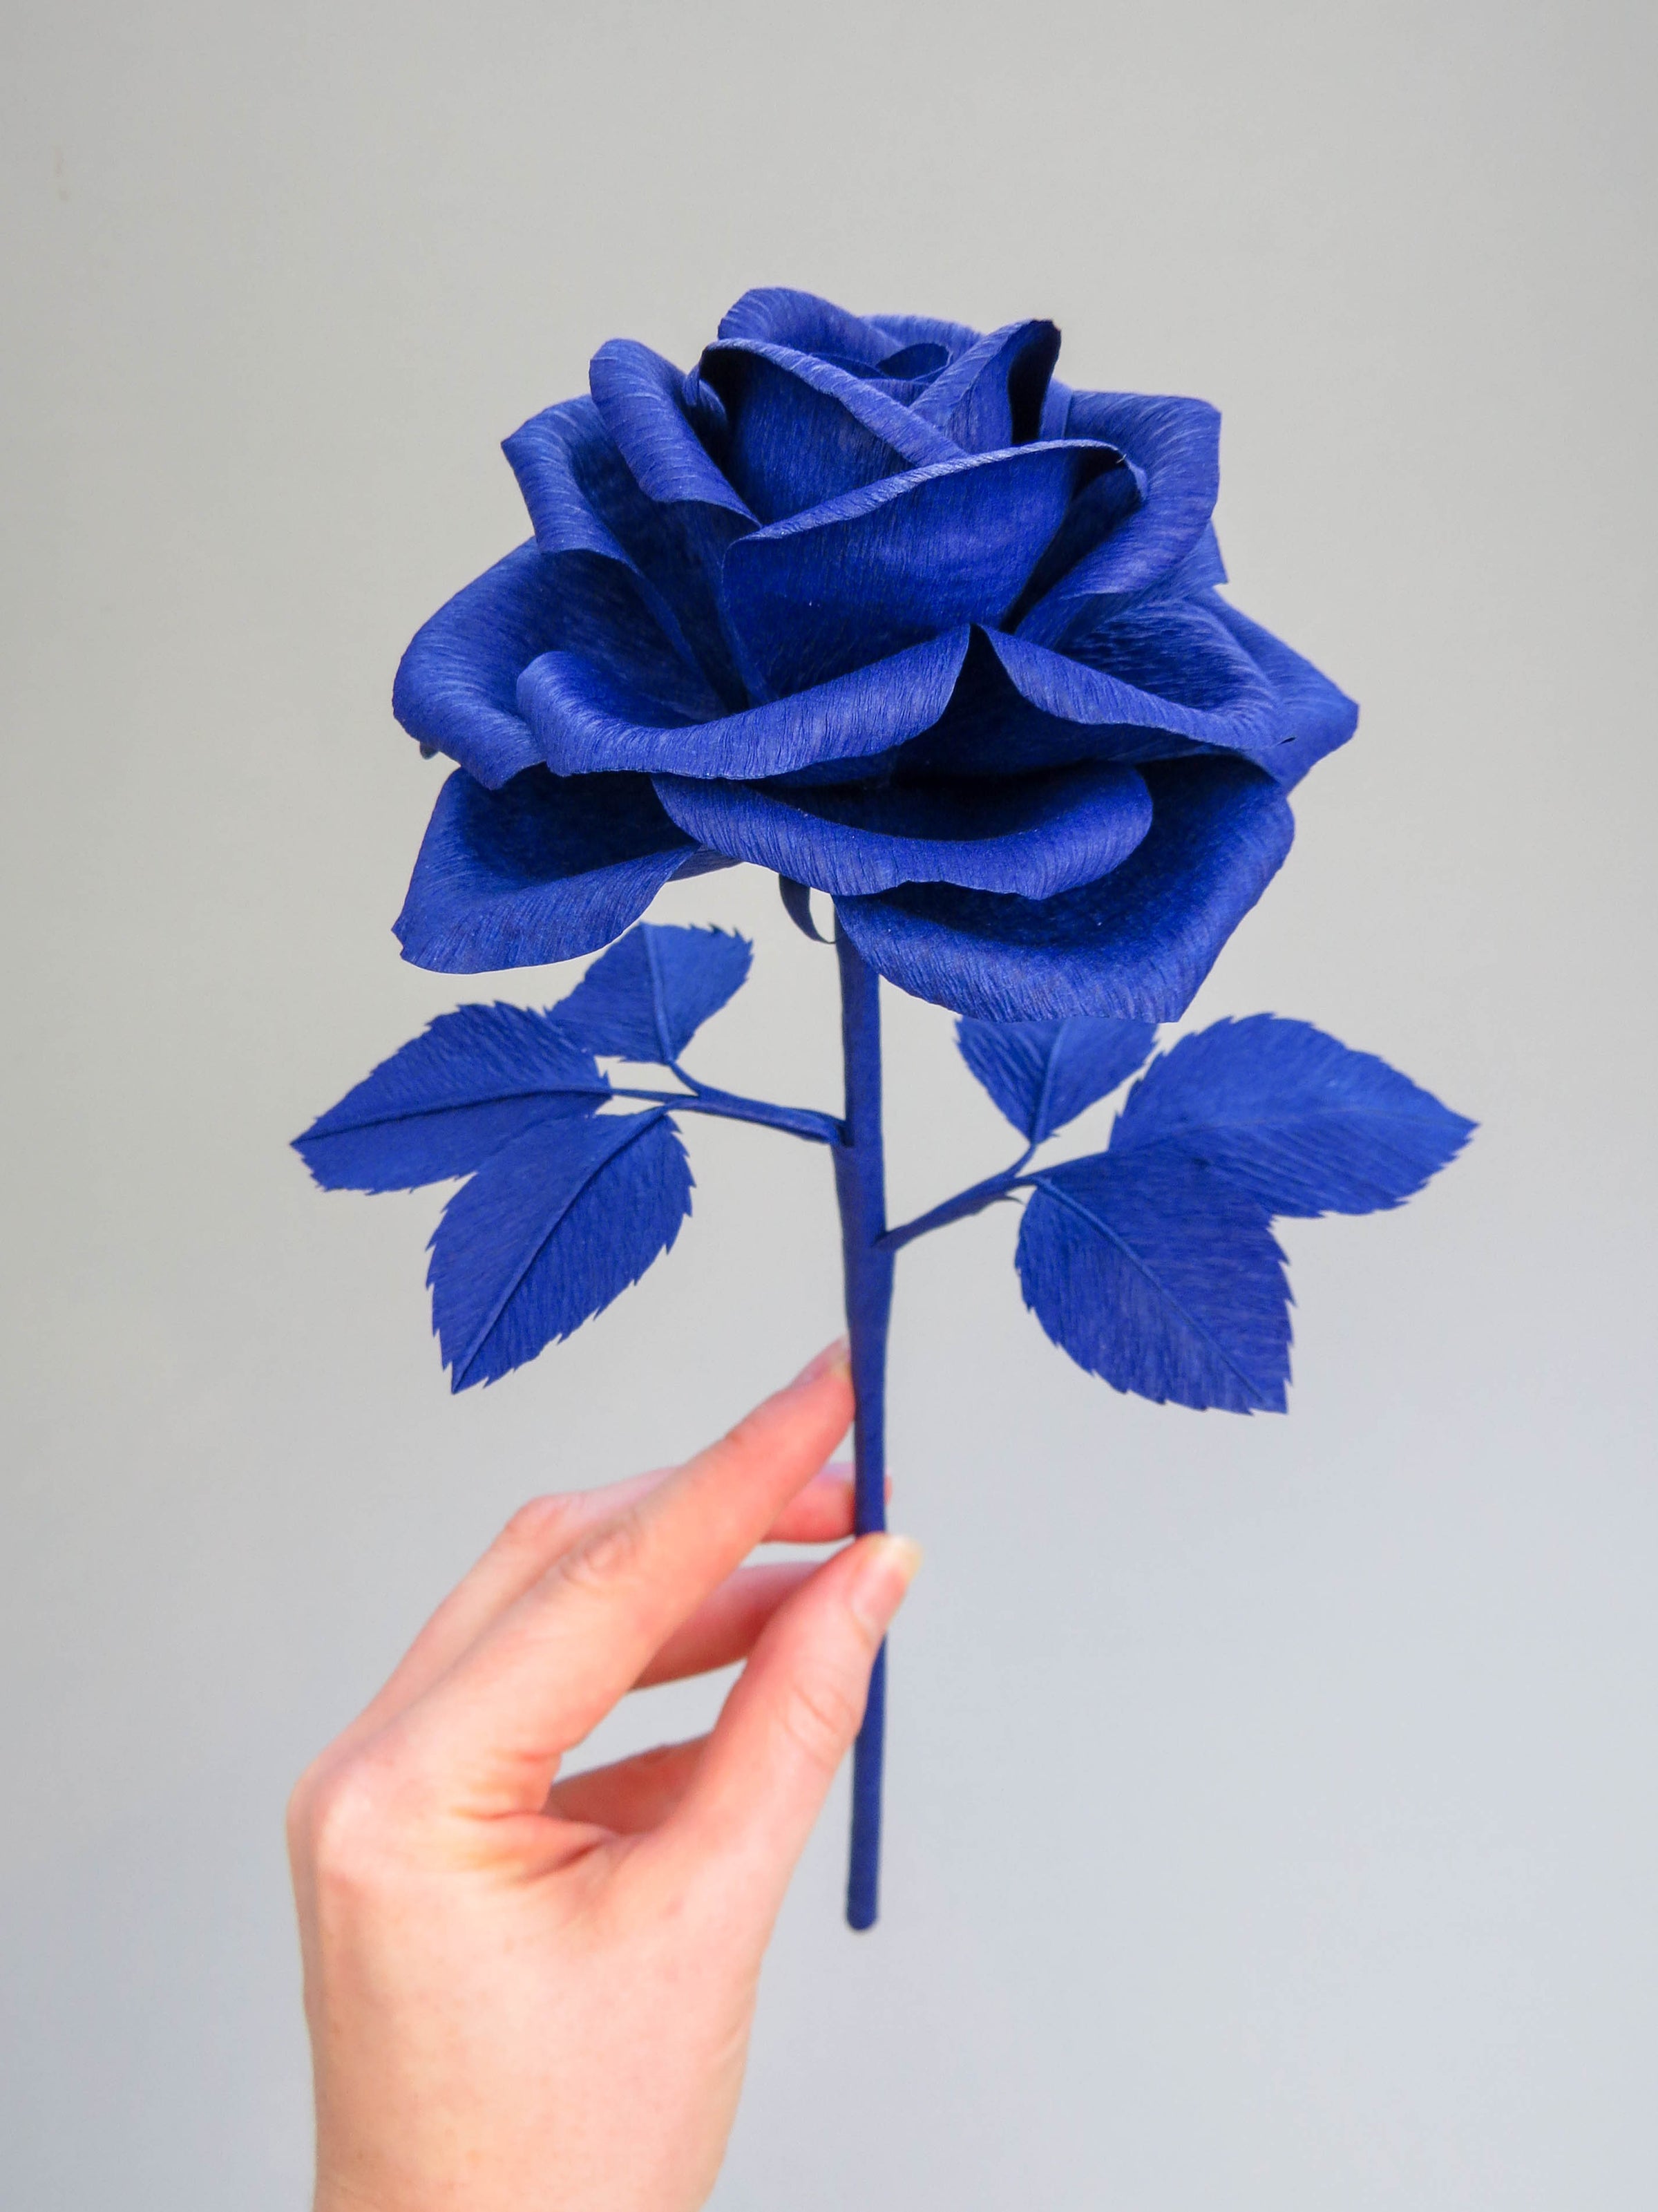 Pale white hand delicately holding the stem of a sapphire blue paper rose with six sapphire blue leaves